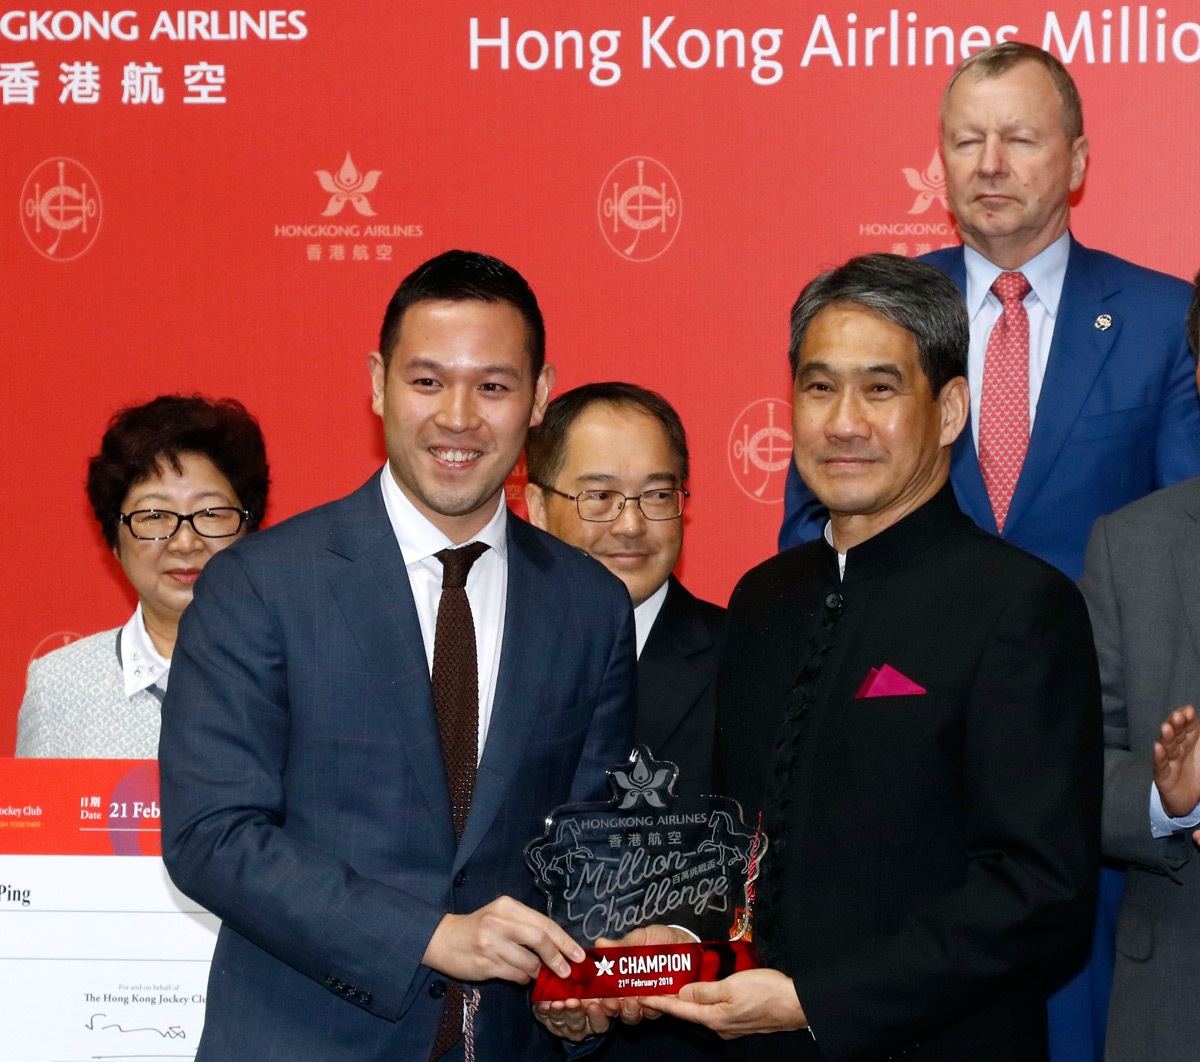 Vice Chairman of Hong Kong Airlines, Mr. Tang King Shing , Vice Chairman and President, Mr. Wang Liya , and Vice President Mr. Vitoo Zhan Xuewai , present a souvenir each to the owners and representatives of the top three horses and winning Trainer.